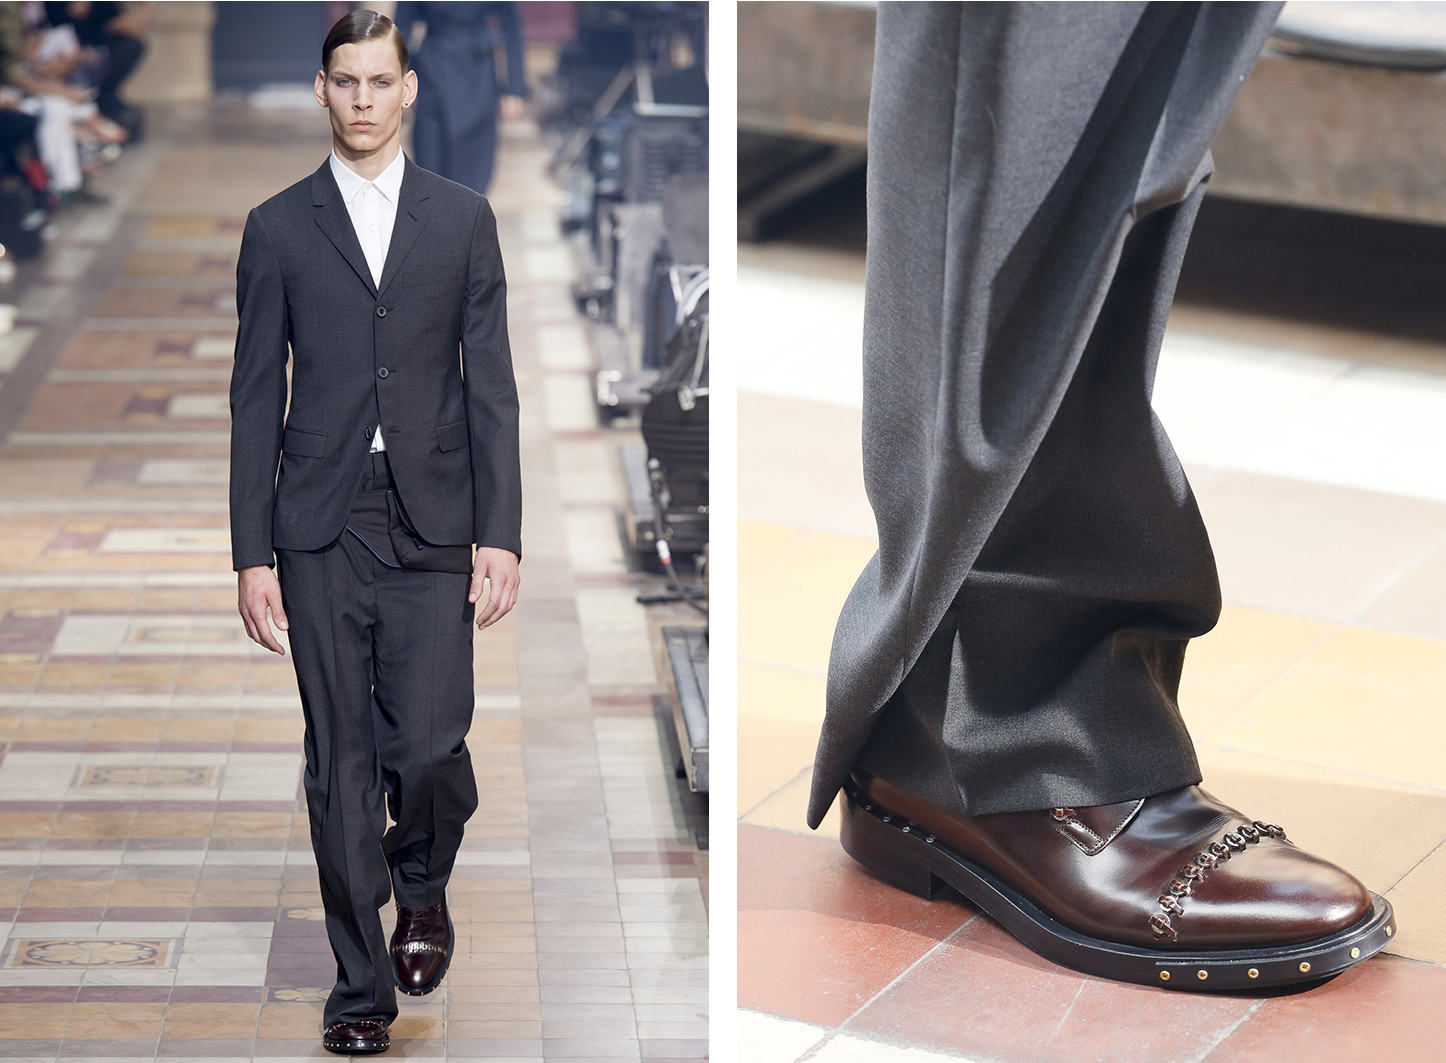 TE DORE: UTILITY AND GLAMOUR FOR LANVIN S/S 2014 MEN